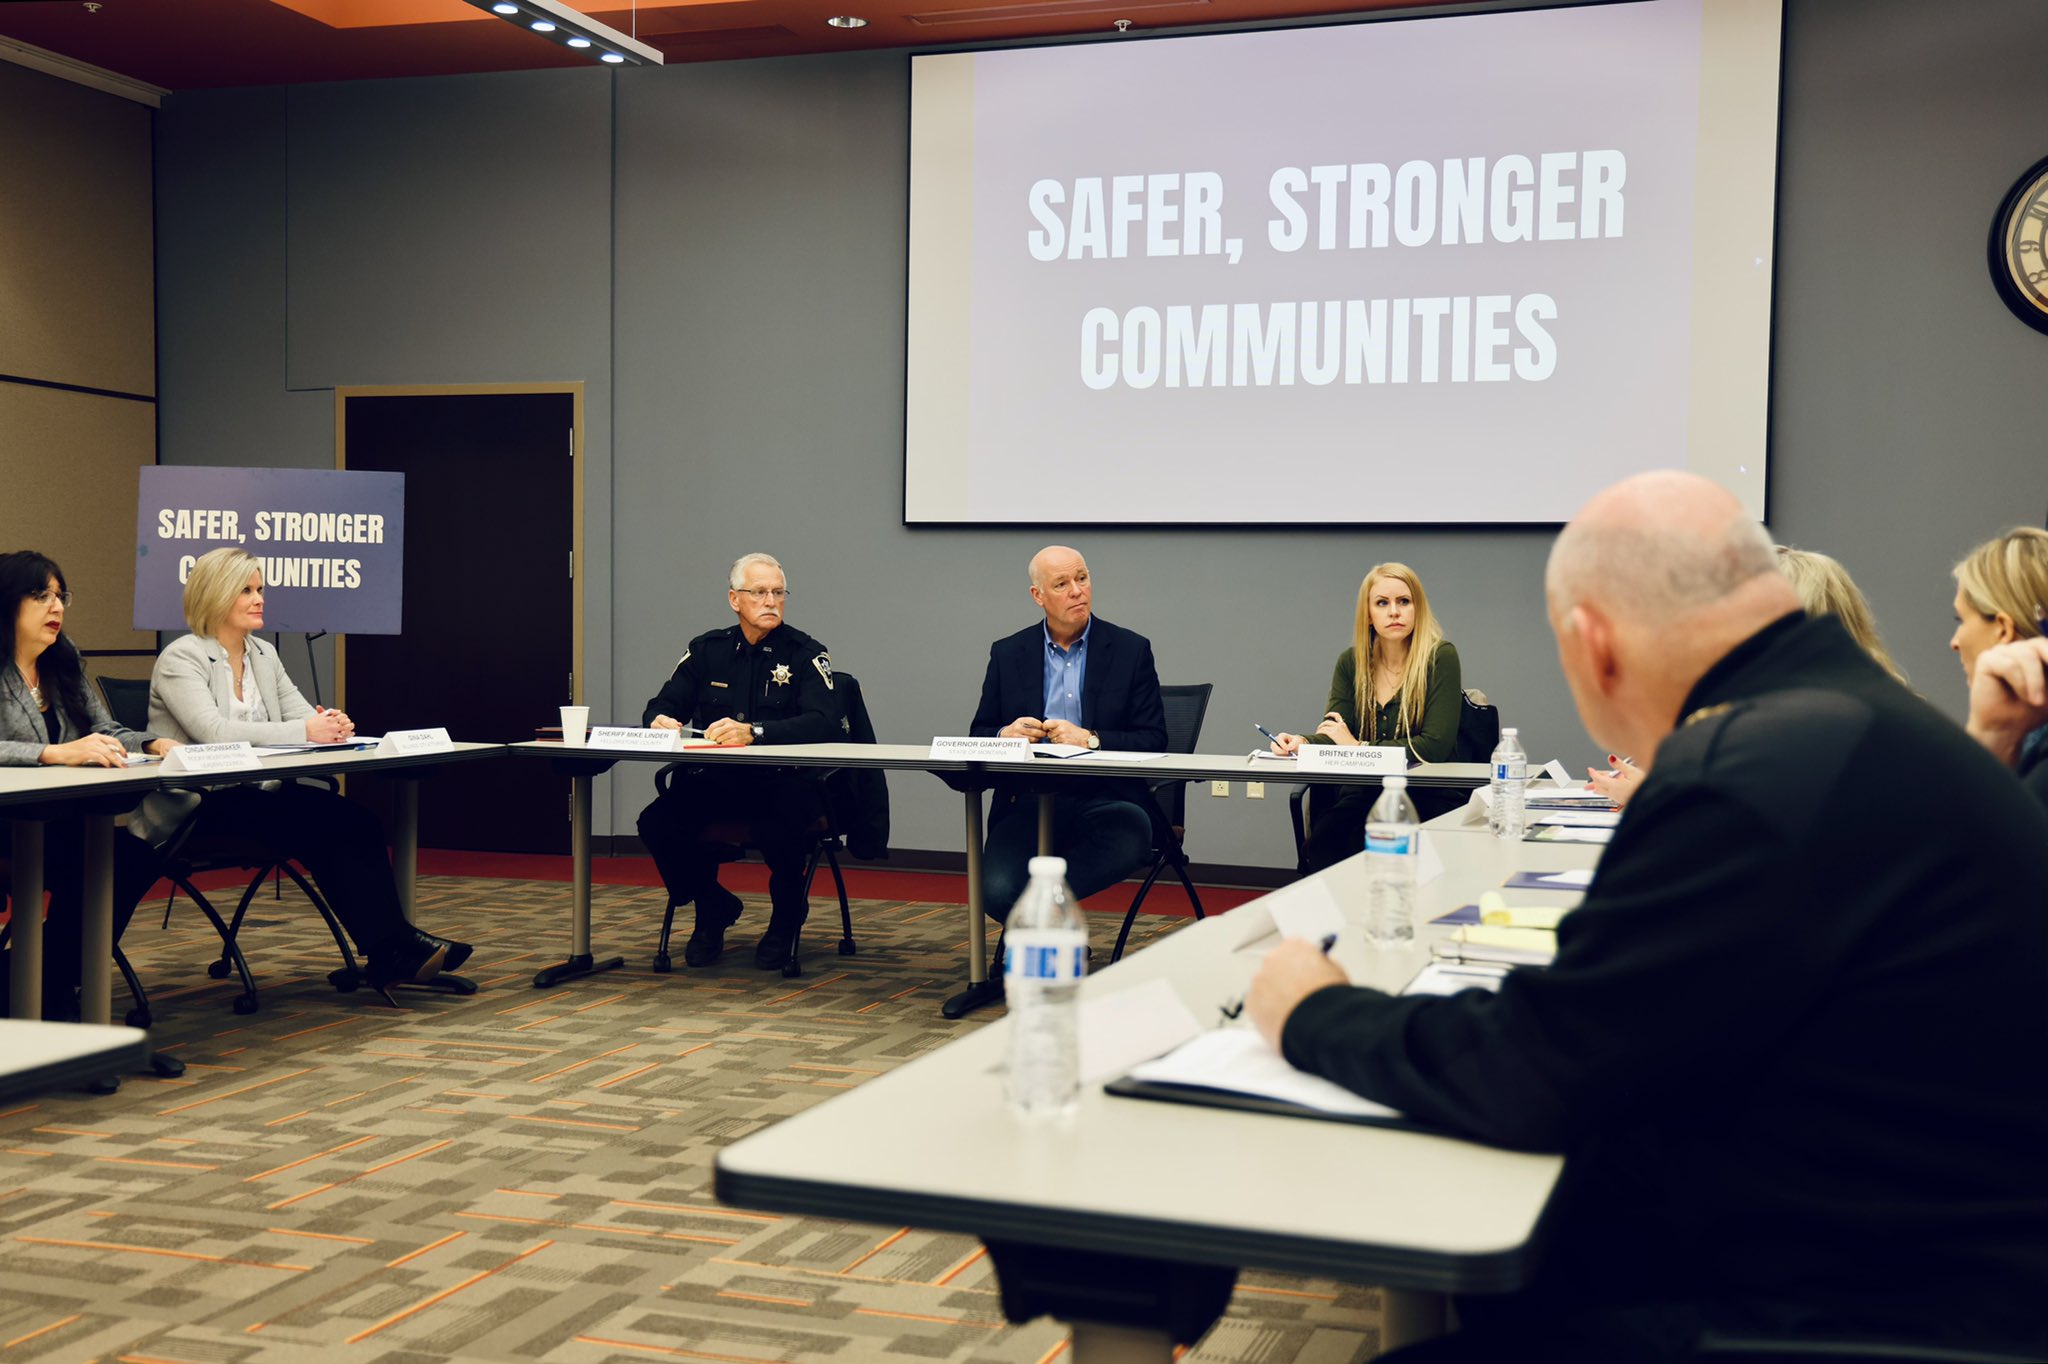 Governor Gianforte leads a roundtable discussion on public safety in Billings